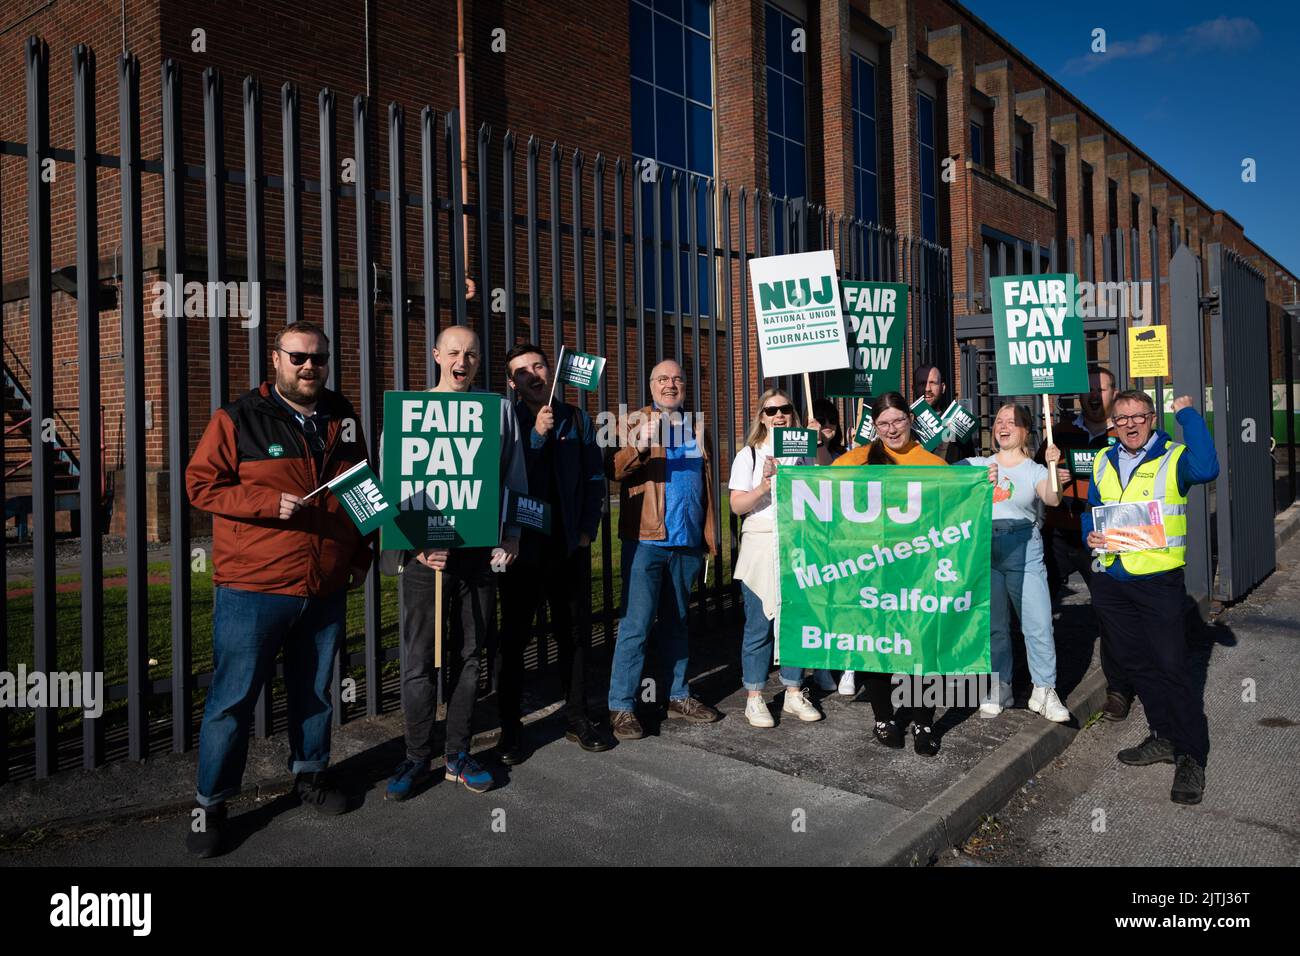 Manchester, UK. 31st Aug, 2022. Journalists gather on the picket line for the first day of strike action. Reach which publishes several newspapers failed to negotiate a deal away from the proposed 3% offered which is below inflation and during a Cost Of Living Crisis. Credit: Andy Barton/Alamy Live News Stock Photo